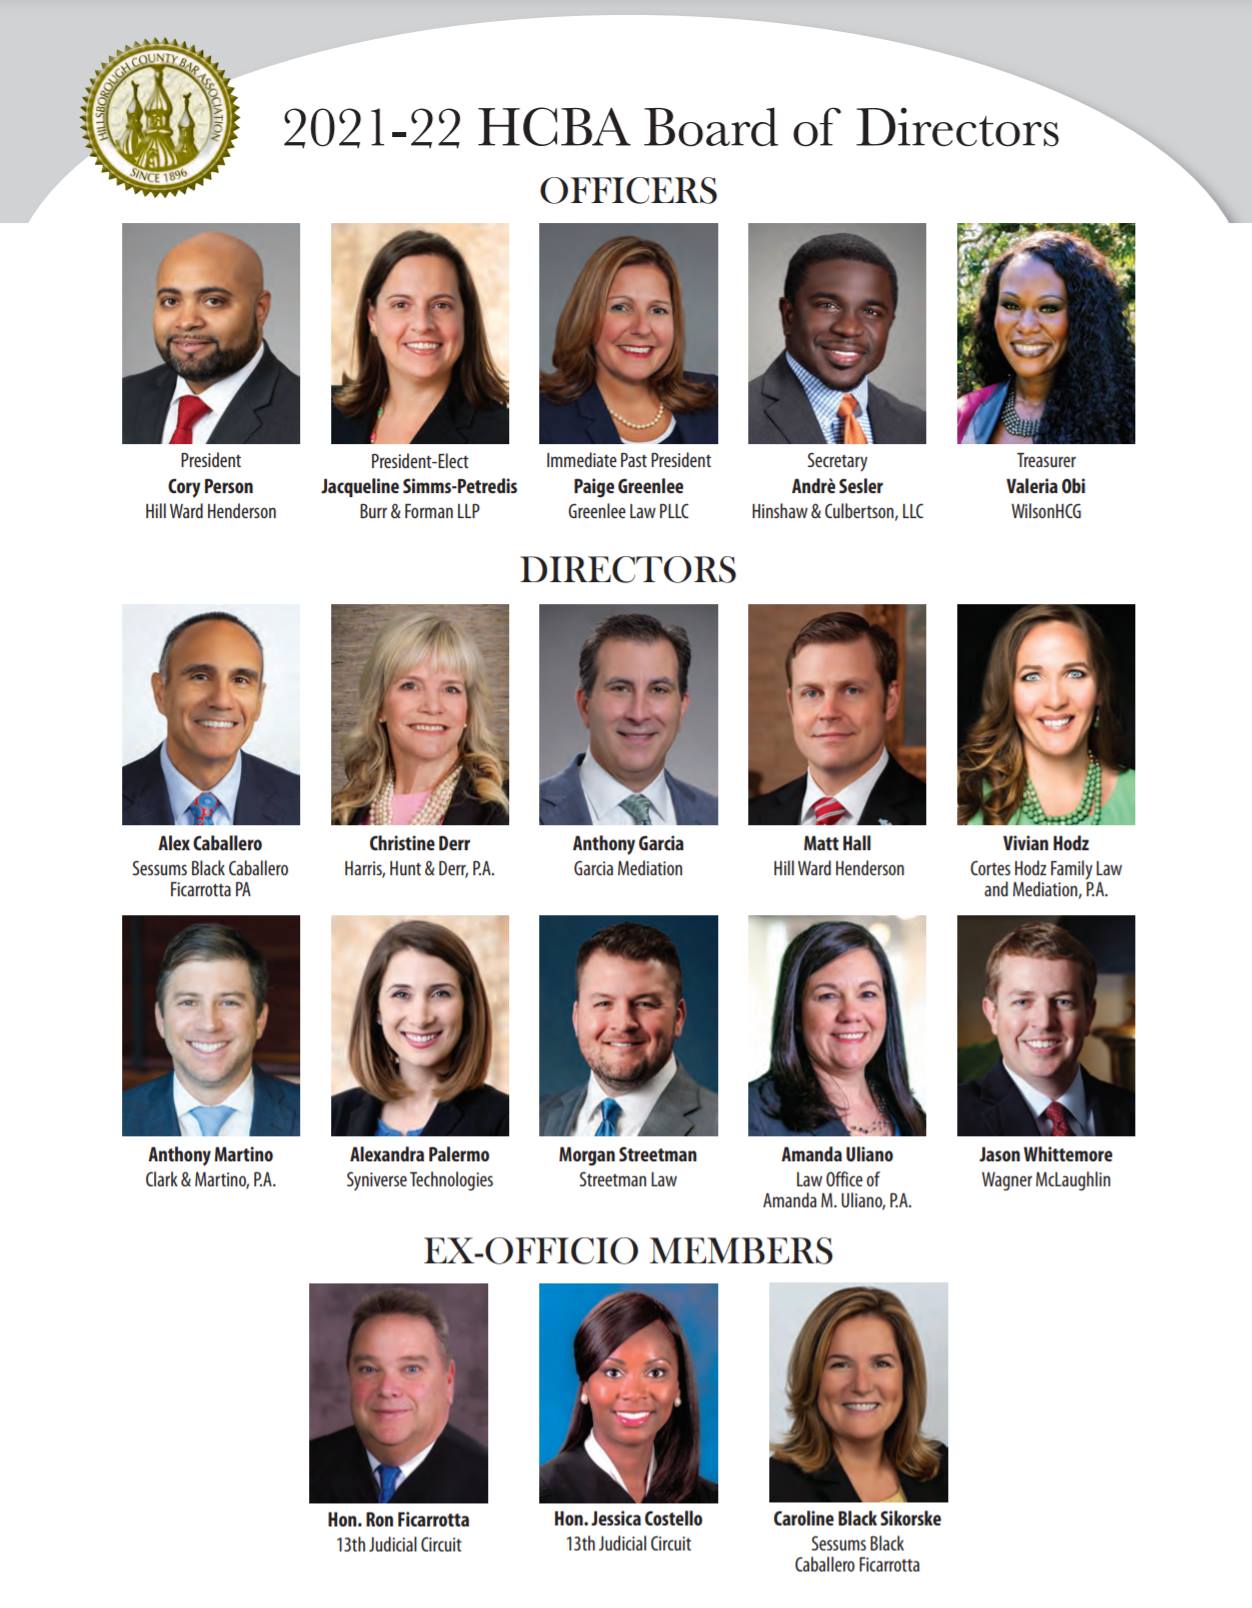 SBCF Congratulates the 2021-22 HCBA Officers and Directors - Sessums Black,  .